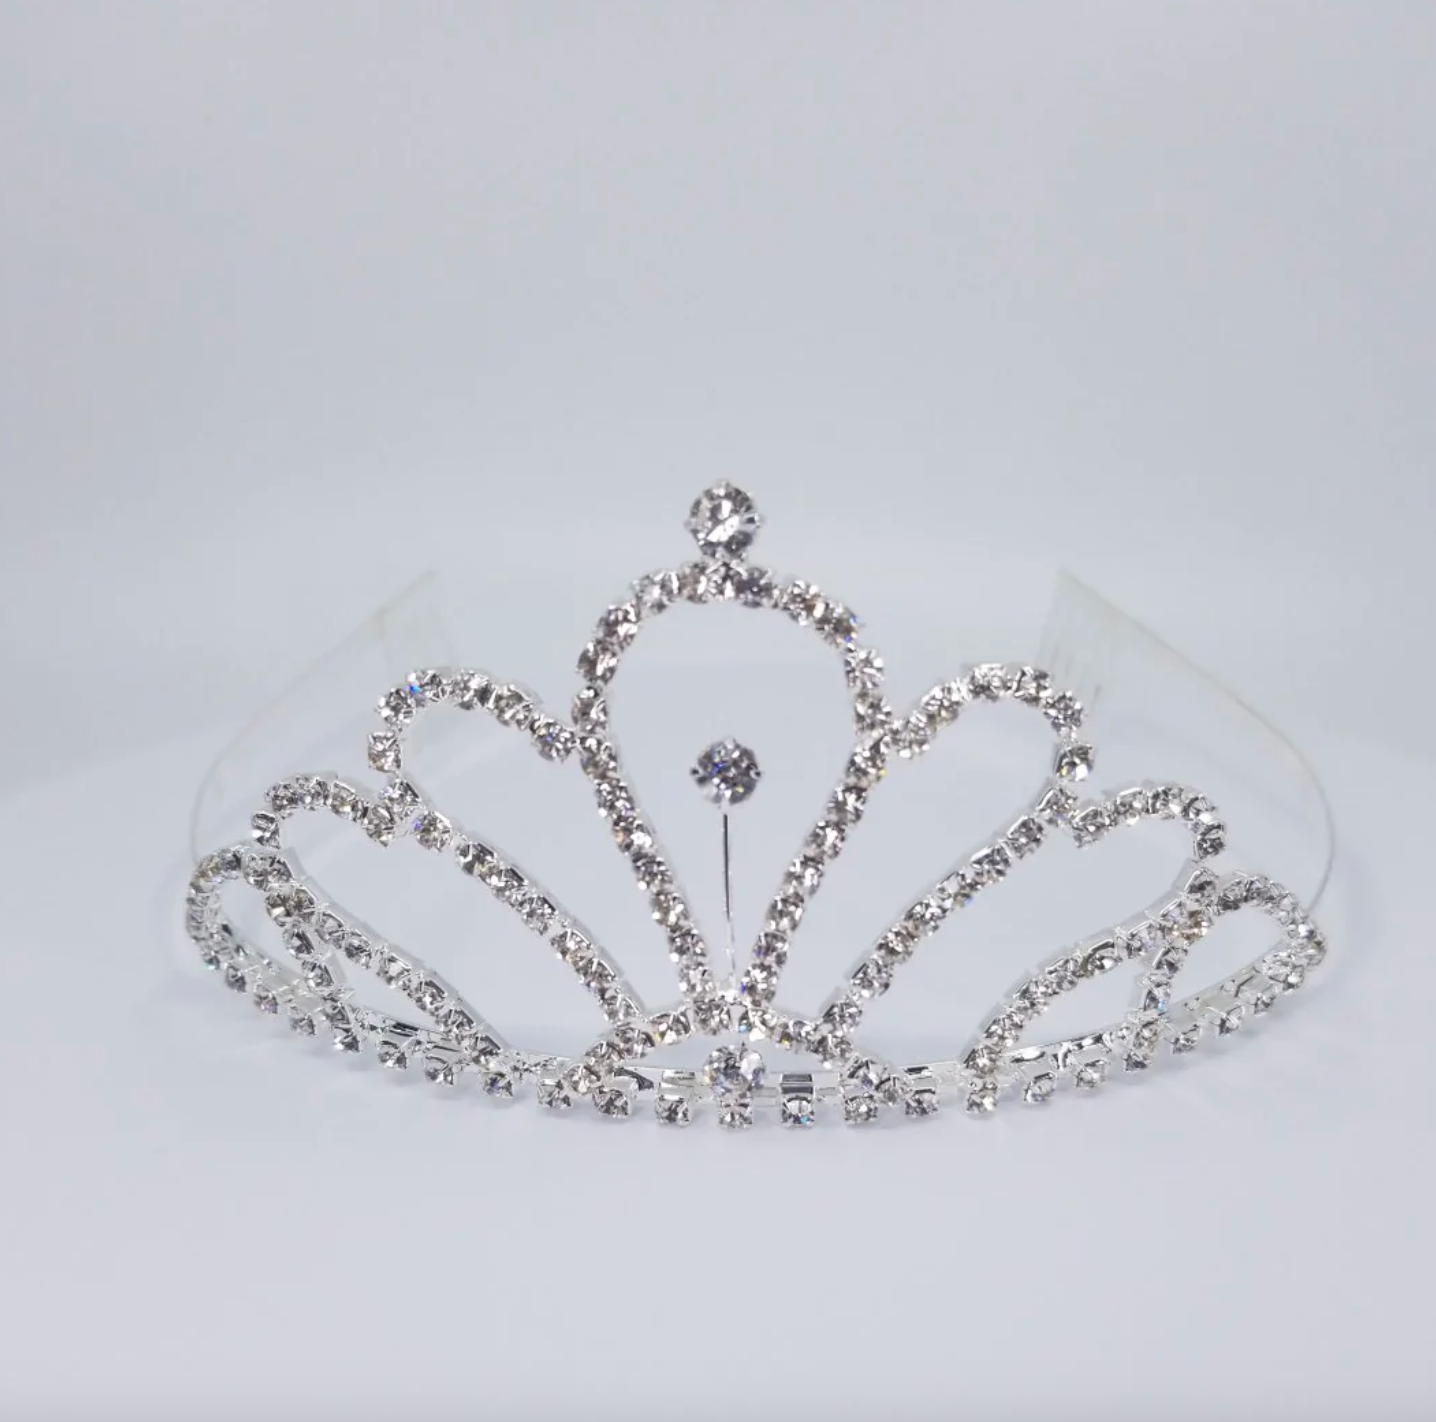 Large Tiara with Crystals